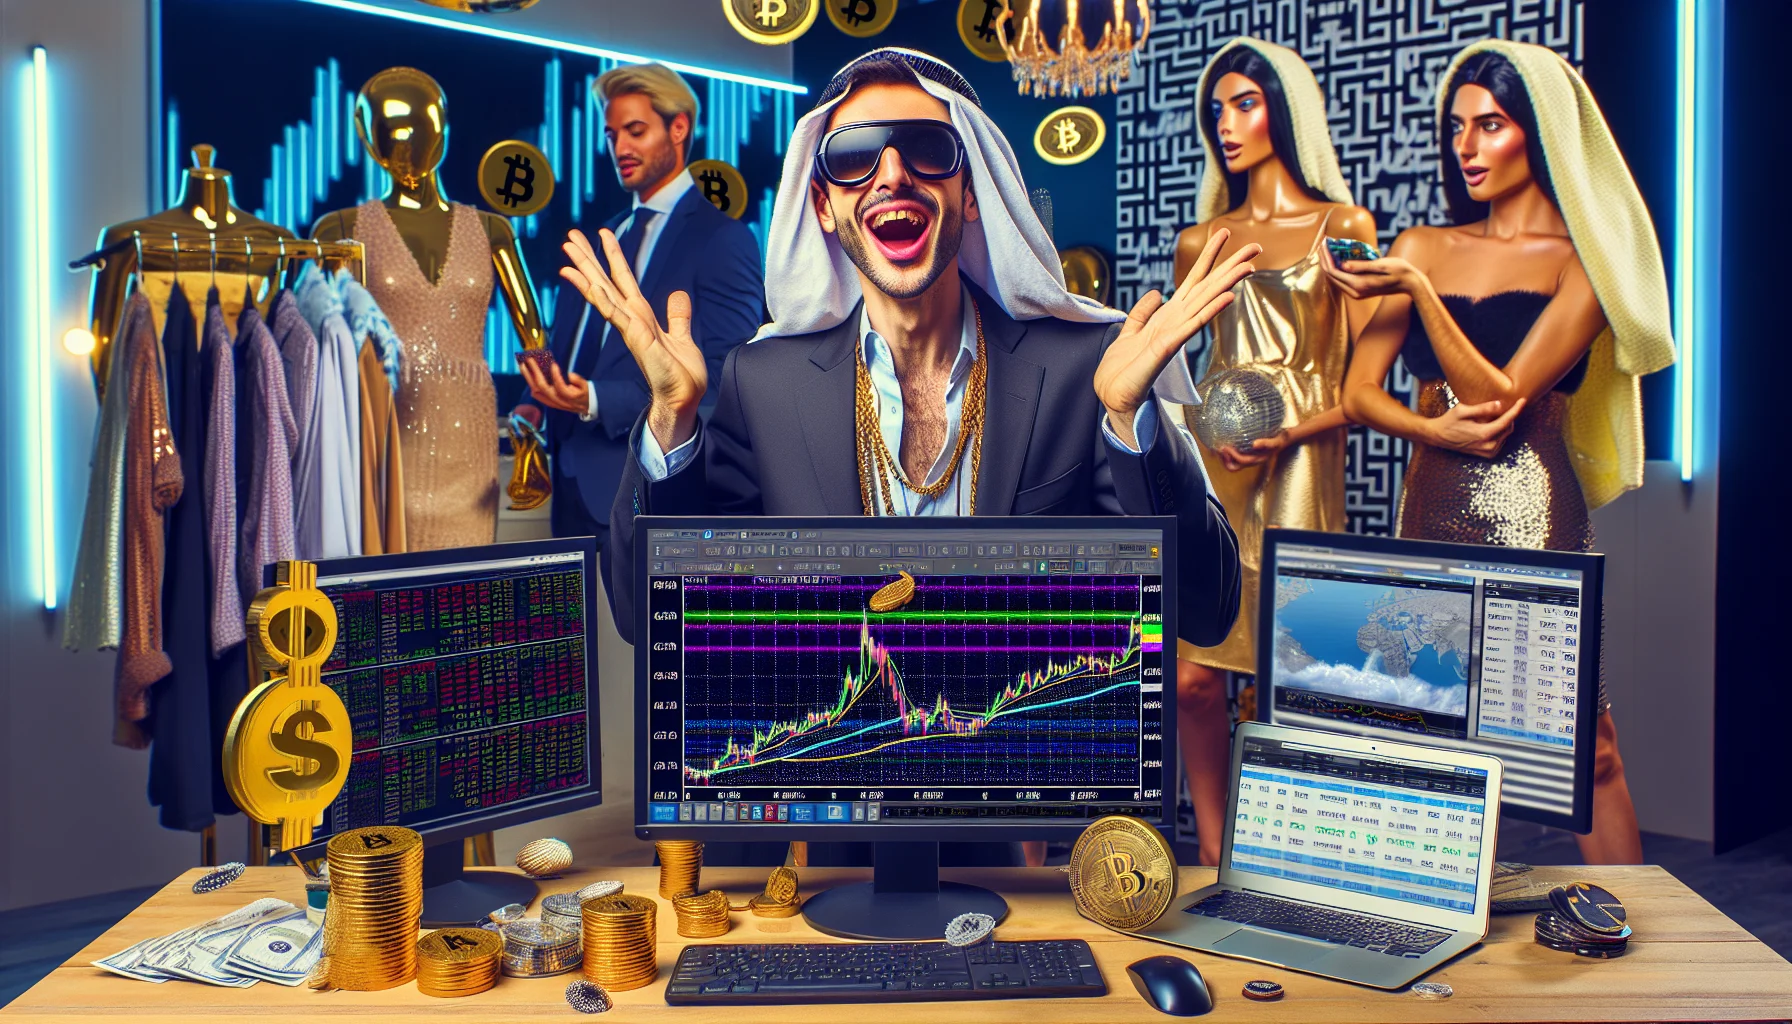 Create a humorous yet realistic image showcasing an individual affiliated with a high-end fashion brand, immersed in an alluring scenario related to generating income on the internet. The person is seen with an expression of surprise and excitement, surrounded by computer screens displaying rising stock charts, digital currencies, and e-commerce websites. The scene is set in an upscale, modern office space decorated with fashion items and accessories reminding of the high-end fashion industry. The individual is gender-ambiguous and of Middle-Eastern descent.